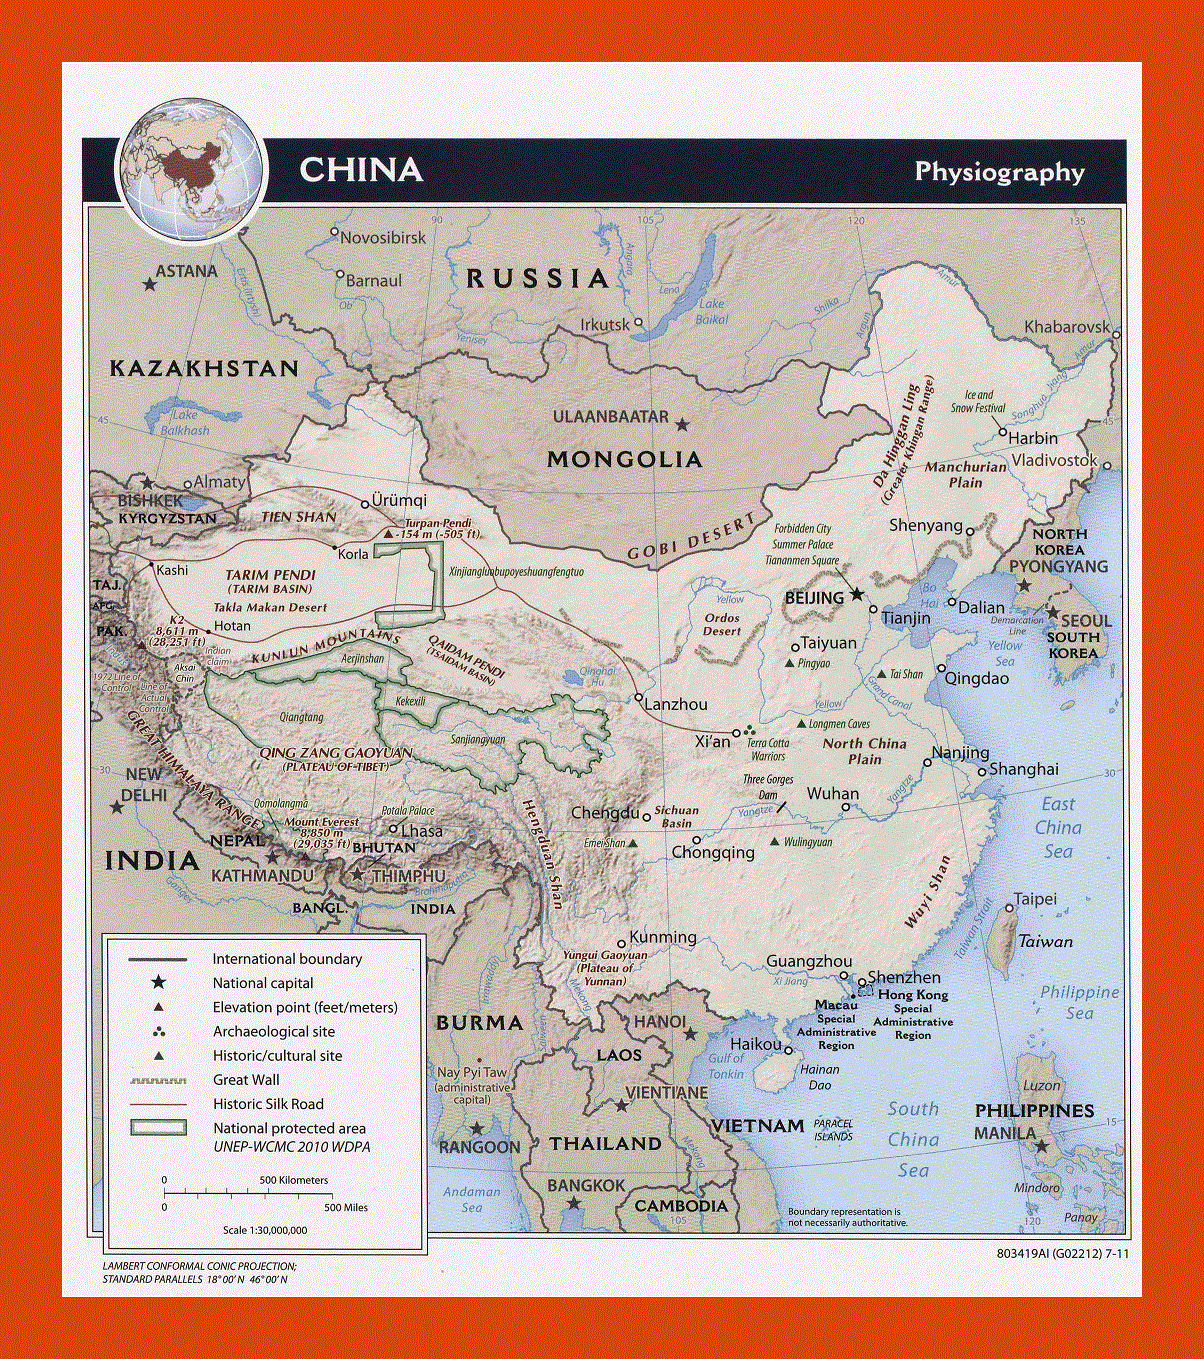 Physiography map of China - 2011